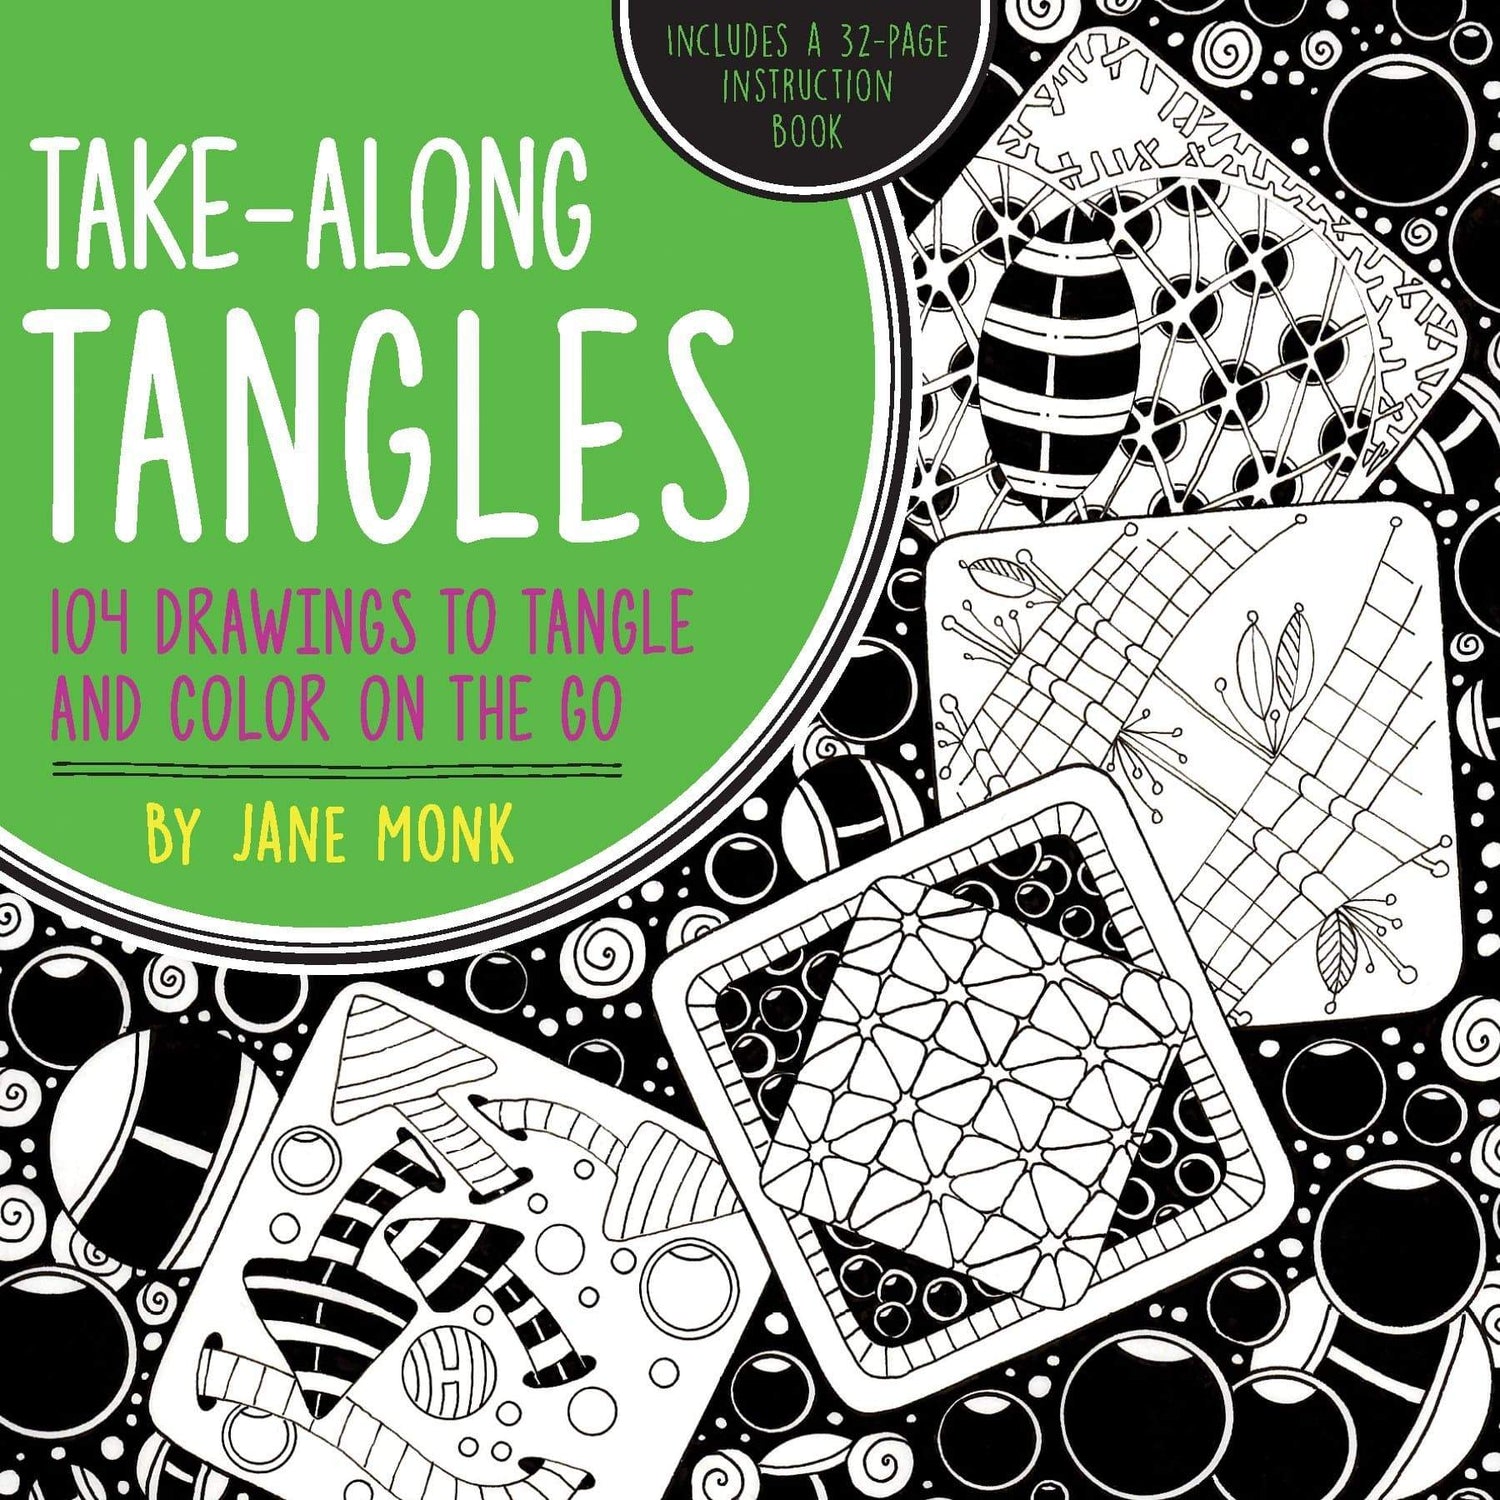 TAKE-ALONG TANGLES: 104 DRAWINGS TO TANGLE AND COLOR ON THE GO